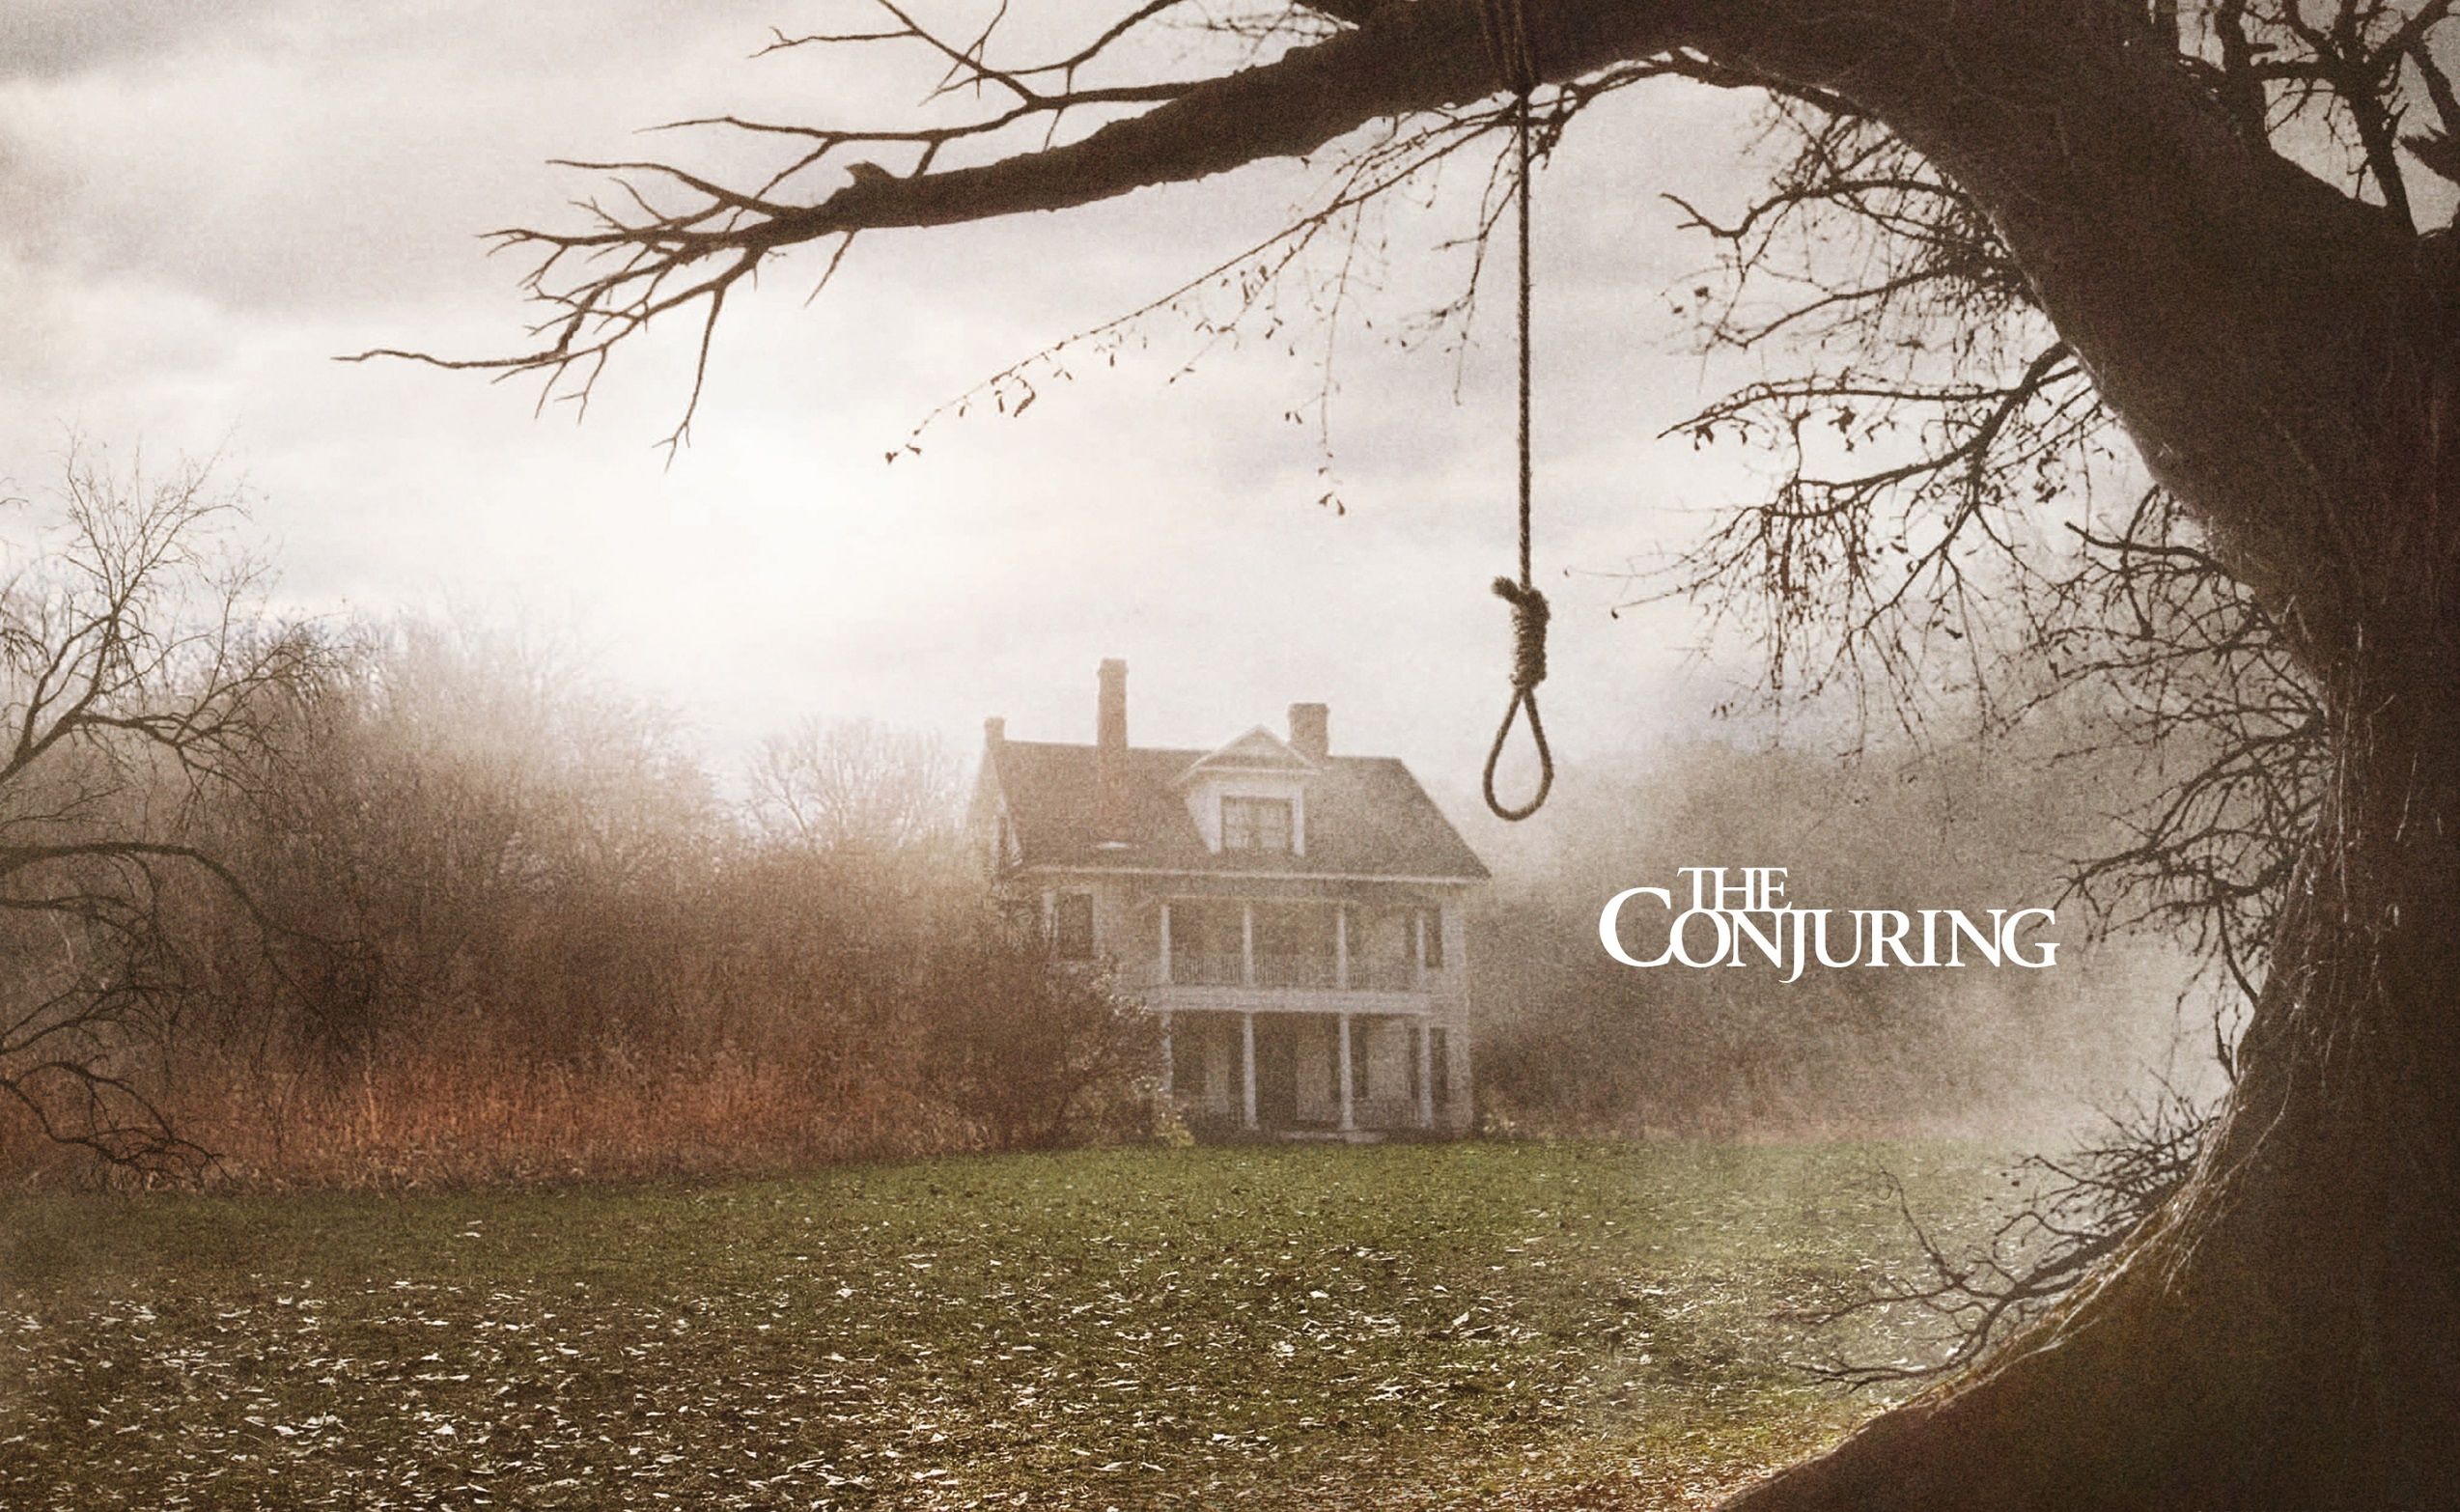 the-conjuring-hd-wallpaper-is-the-conjuring-2-based-on-one-of-these-terrifying-true-poltergeist-stories-jpeg-250740